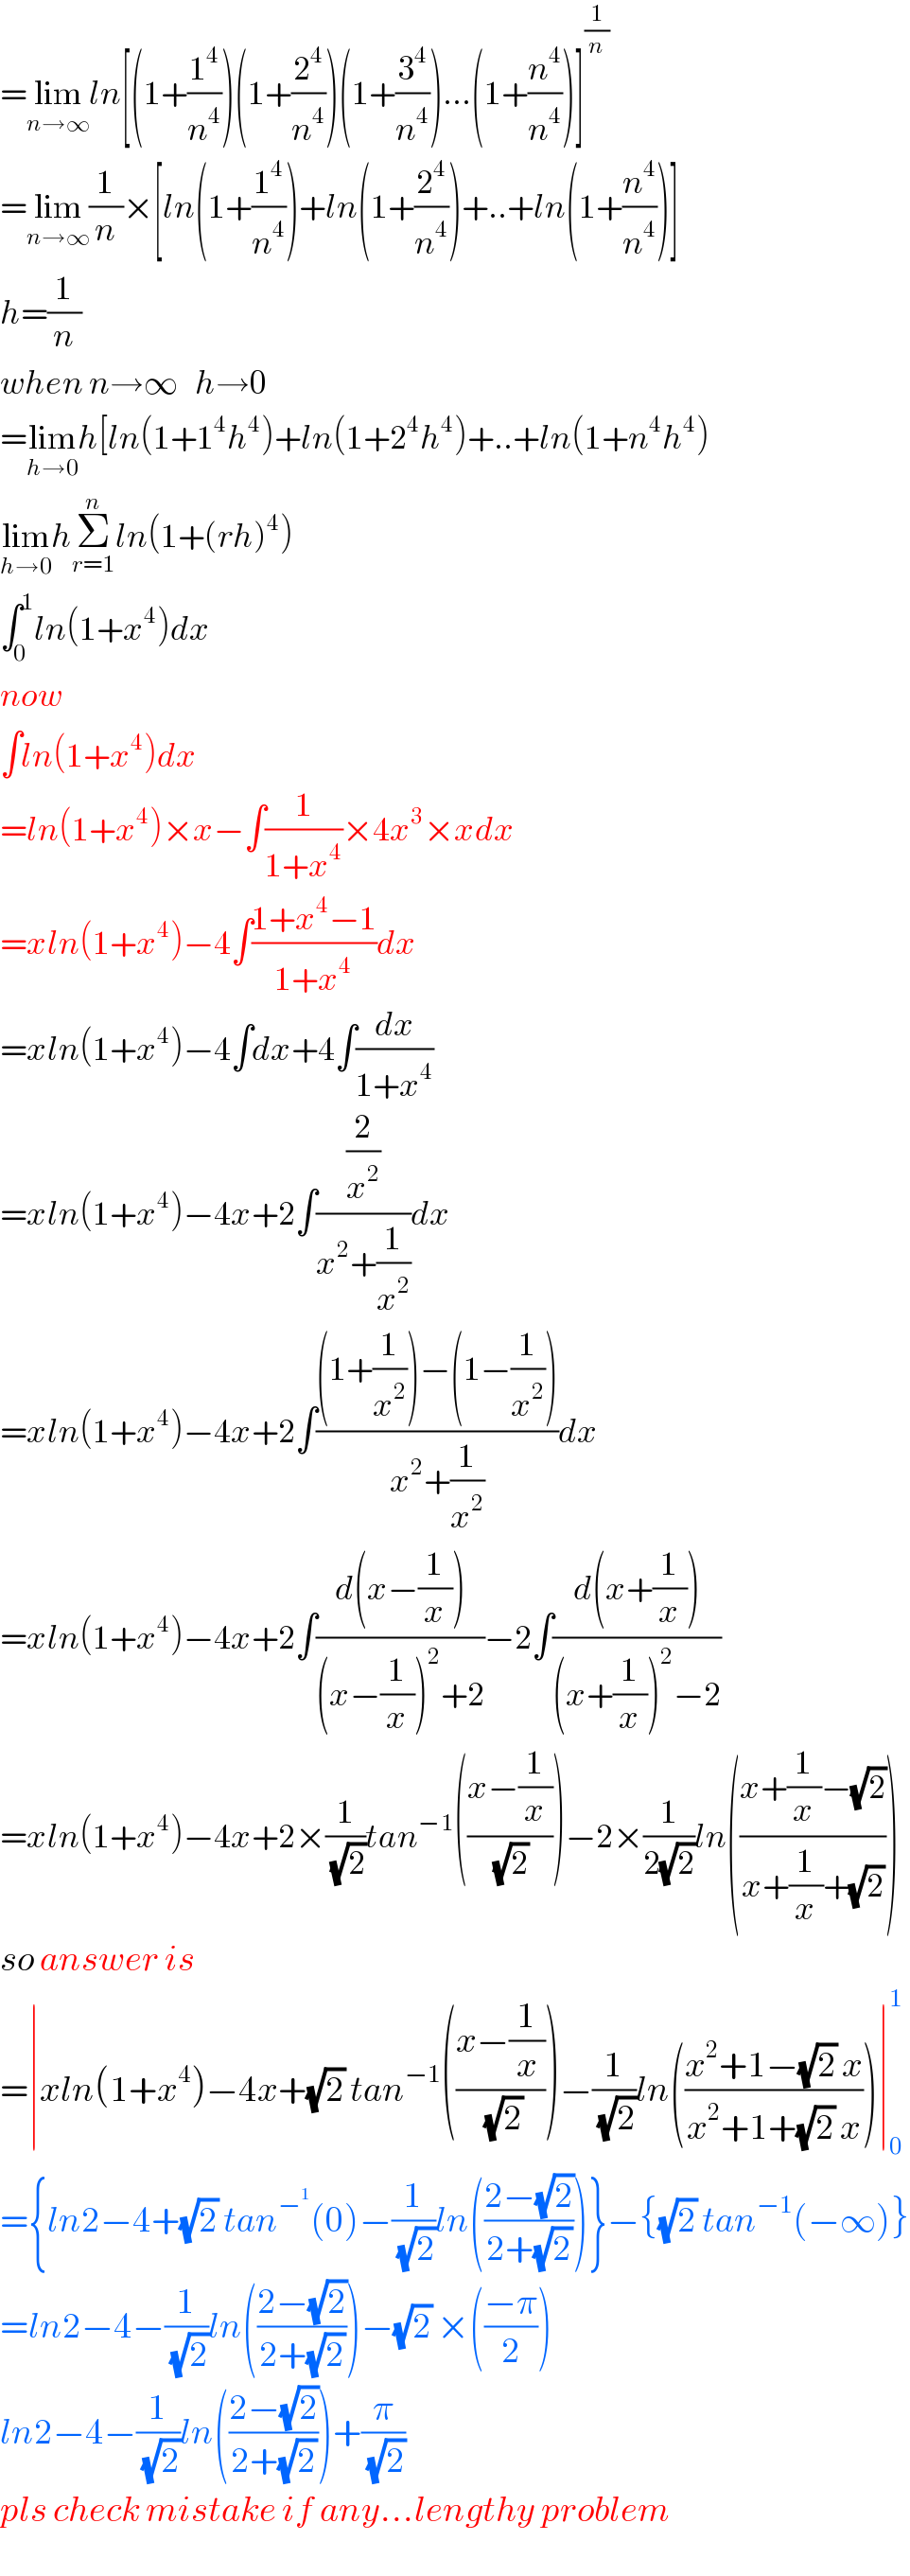 =lim_(n→∞) ln[(1+(1^4 /n^4 ))(1+(2^4 /n^4 ))(1+(3^4 /n^4 ))...(1+(n^4 /n^4 ))]^(1/n)   =lim_(n→∞) (1/n)×[ln(1+(1^4 /n^4 ))+ln(1+(2^4 /n^4 ))+..+ln(1+(n^4 /n^4 ))]  h=(1/n)  when n→∞   h→0  =lim_(h→0) h[ln(1+1^4 h^4 )+ln(1+2^4 h^4 )+..+ln(1+n^4 h^4 )  lim_(h→0) hΣ_(r=1) ^n ln(1+(rh)^4 )  ∫_0 ^1 ln(1+x^4 )dx  now  ∫ln(1+x^4 )dx  =ln(1+x^4 )×x−∫(1/(1+x^4 ))×4x^3 ×xdx  =xln(1+x^4 )−4∫((1+x^4 −1)/(1+x^4 ))dx  =xln(1+x^4 )−4∫dx+4∫(dx/(1+x^4 ))  =xln(1+x^4 )−4x+2∫((2/x^2 )/(x^2 +(1/x^2 )))dx  =xln(1+x^4 )−4x+2∫(((1+(1/x^2 ))−(1−(1/x^2 )))/(x^2 +(1/x^2 )))dx  =xln(1+x^4 )−4x+2∫((d(x−(1/x)))/((x−(1/x))^2 +2))−2∫((d(x+(1/x)))/((x+(1/x))^2 −2))  =xln(1+x^4 )−4x+2×(1/(√2))tan^(−1) (((x−(1/x))/(√2)))−2×(1/(2(√2)))ln(((x+(1/x)−(√2))/(x+(1/x)+(√2))))  so answer is  =∣xln(1+x^4 )−4x+(√2) tan^(−1) (((x−(1/x))/(√2)))−(1/(√2))ln(((x^2 +1−(√2) x)/(x^2 +1+(√2) x)))∣_0 ^1   ={ln2−4+(√2) tan^−^1  (0)−(1/(√2))ln(((2−(√2))/(2+(√2))))}−{(√2) tan^(−1) (−∞)}  =ln2−4−(1/(√2))ln(((2−(√2))/(2+(√2))))−(√2) ×(((−π)/2))  ln2−4−(1/(√2))ln(((2−(√2))/(2+(√2))))+(π/(√2))  pls check mistake if any...lengthy problem  